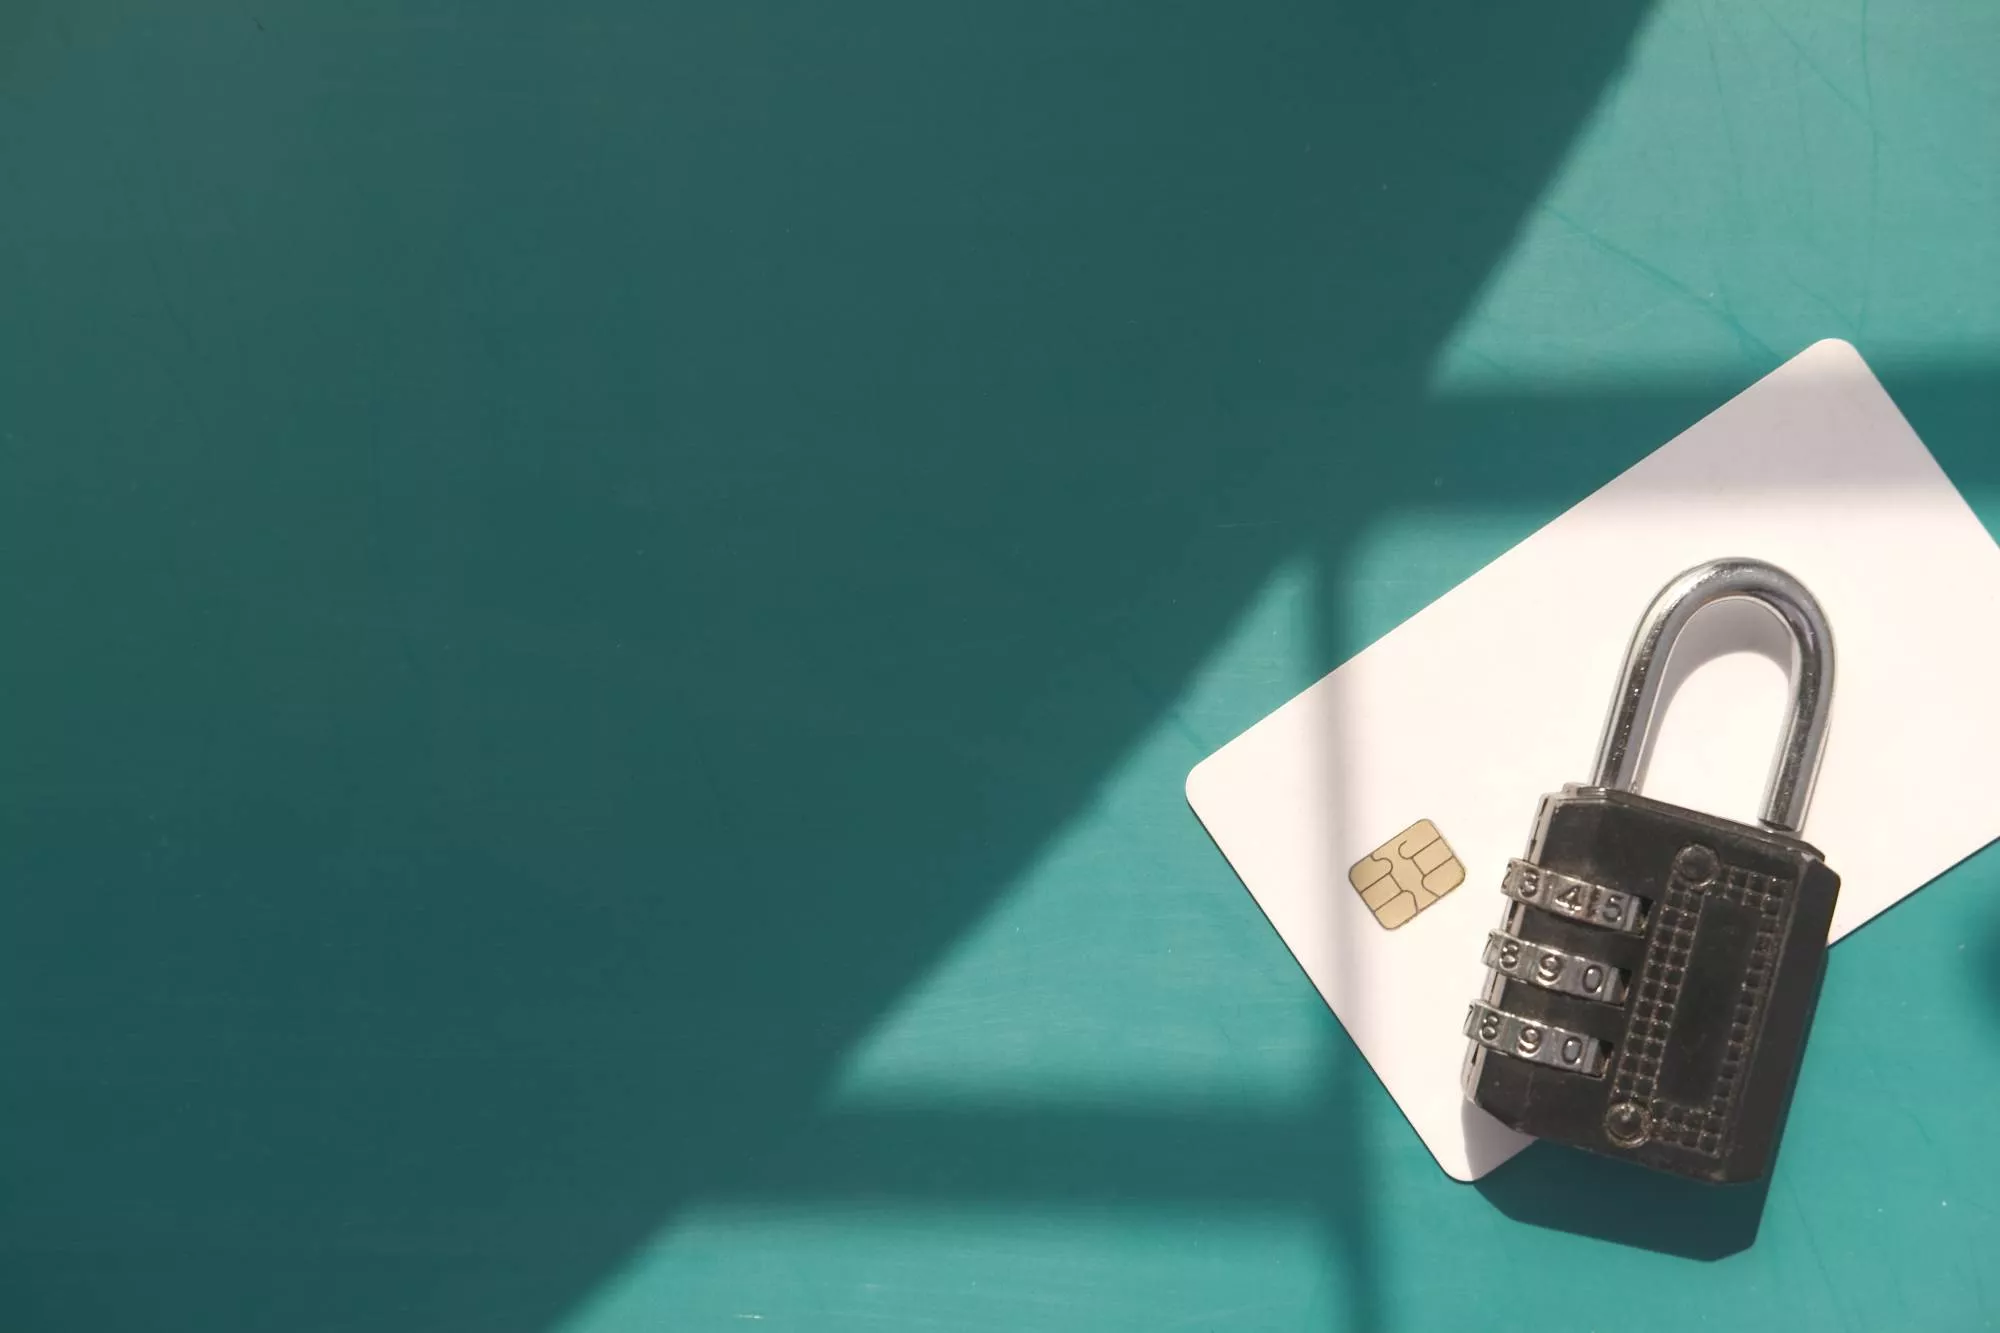 A lock and credit card tokens on a shadowy teal background